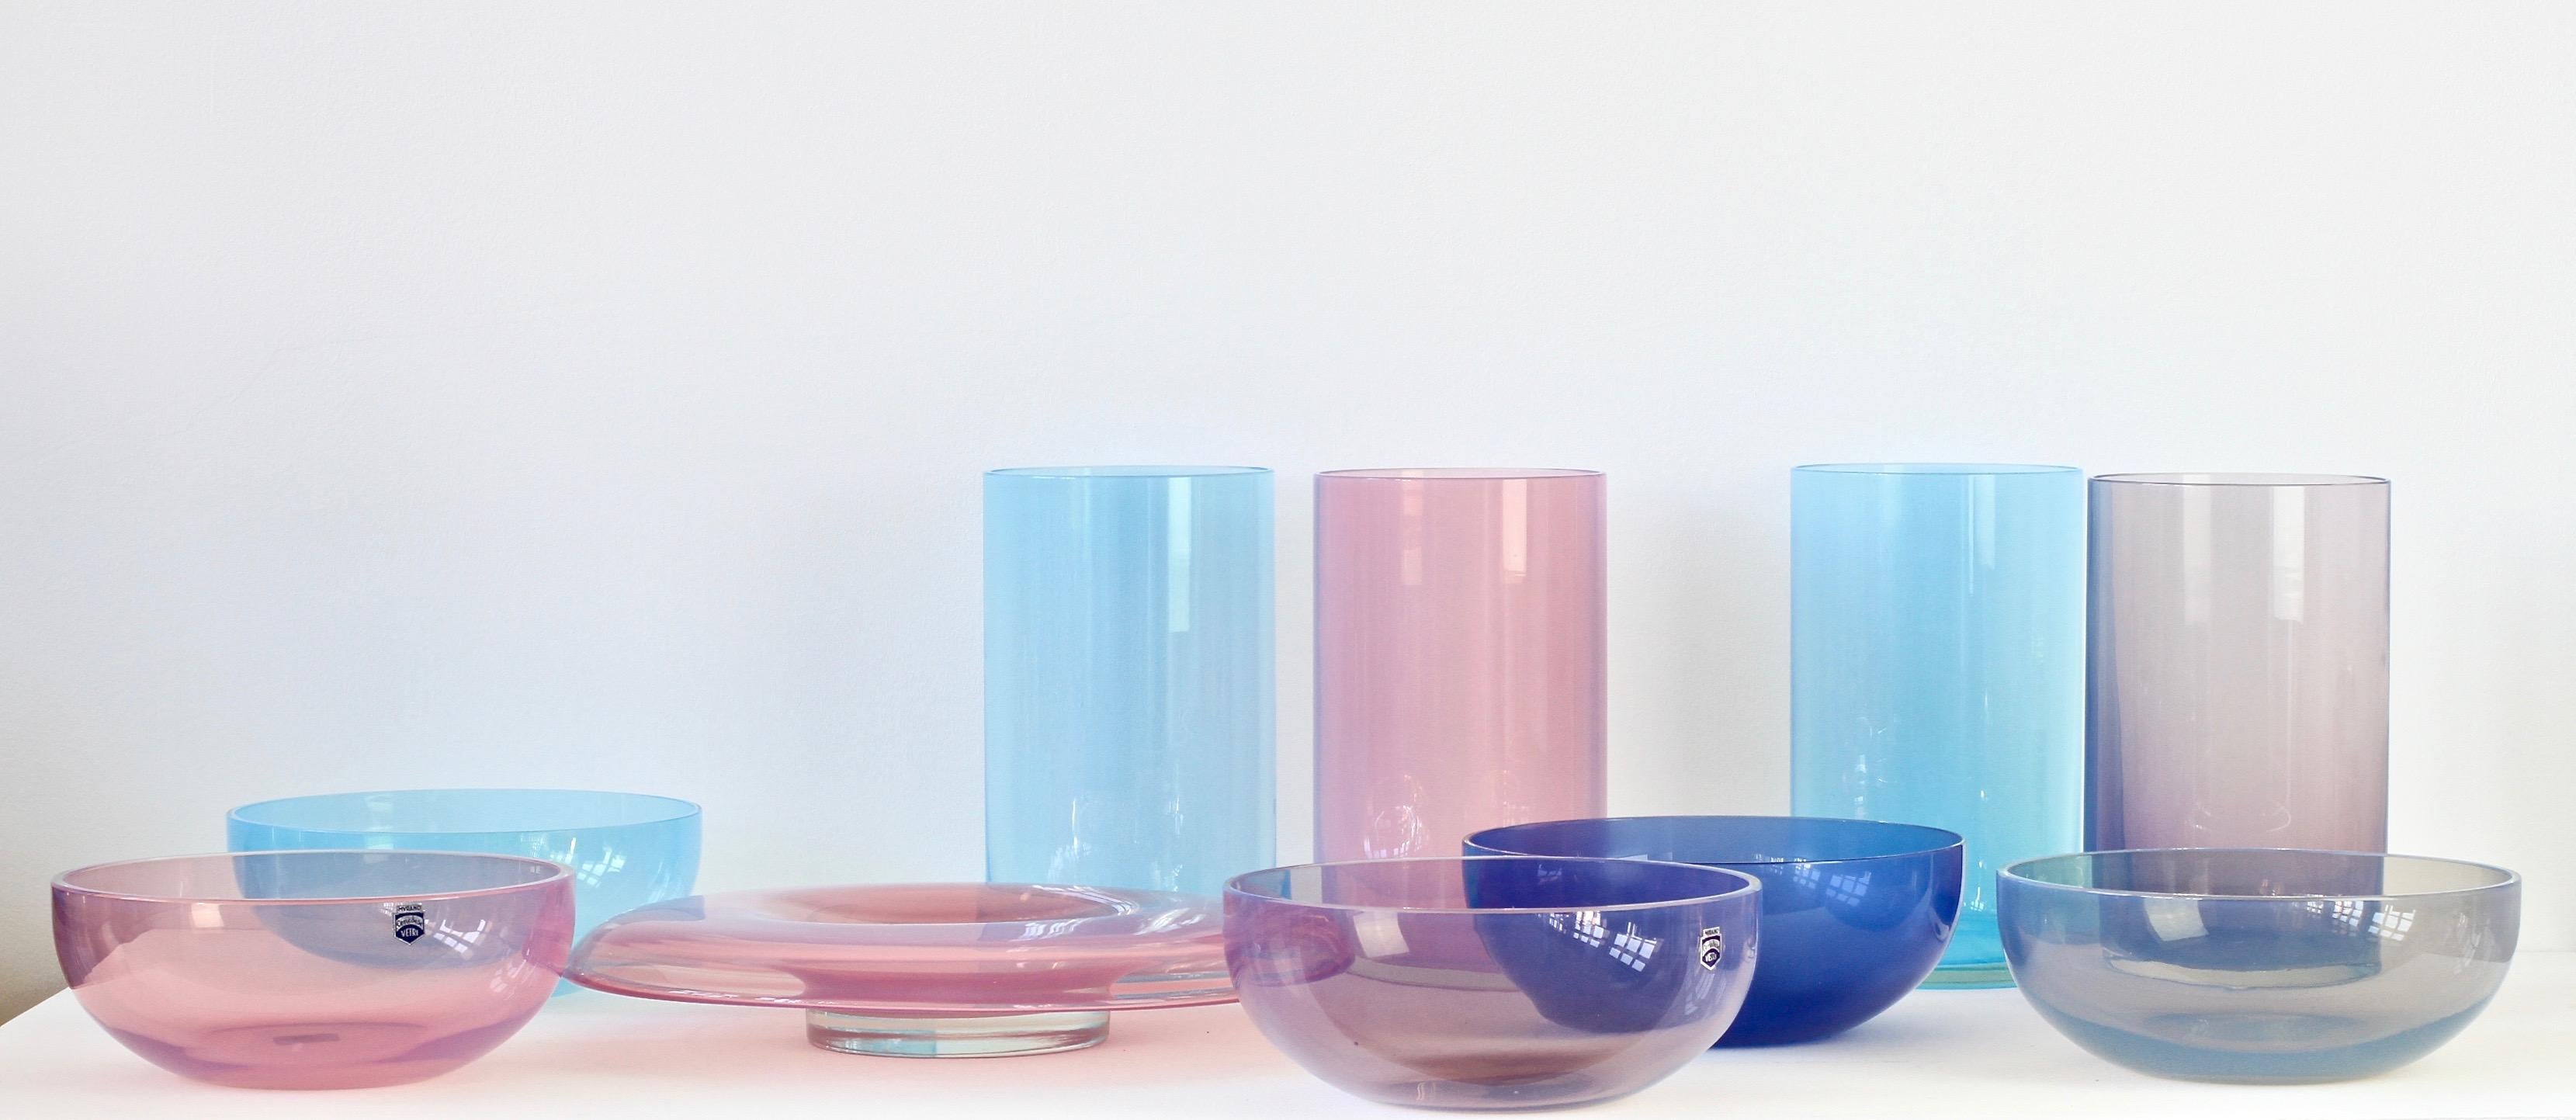 Signed set or ensemble of Murano glass bowls, vases and vessels by Cenedese circa 1960s. Wonderful translucent colors of vibrant blues, aubergine, moss green and pink. Simplistic yet elegant forms - almost futuristic - especially the pink